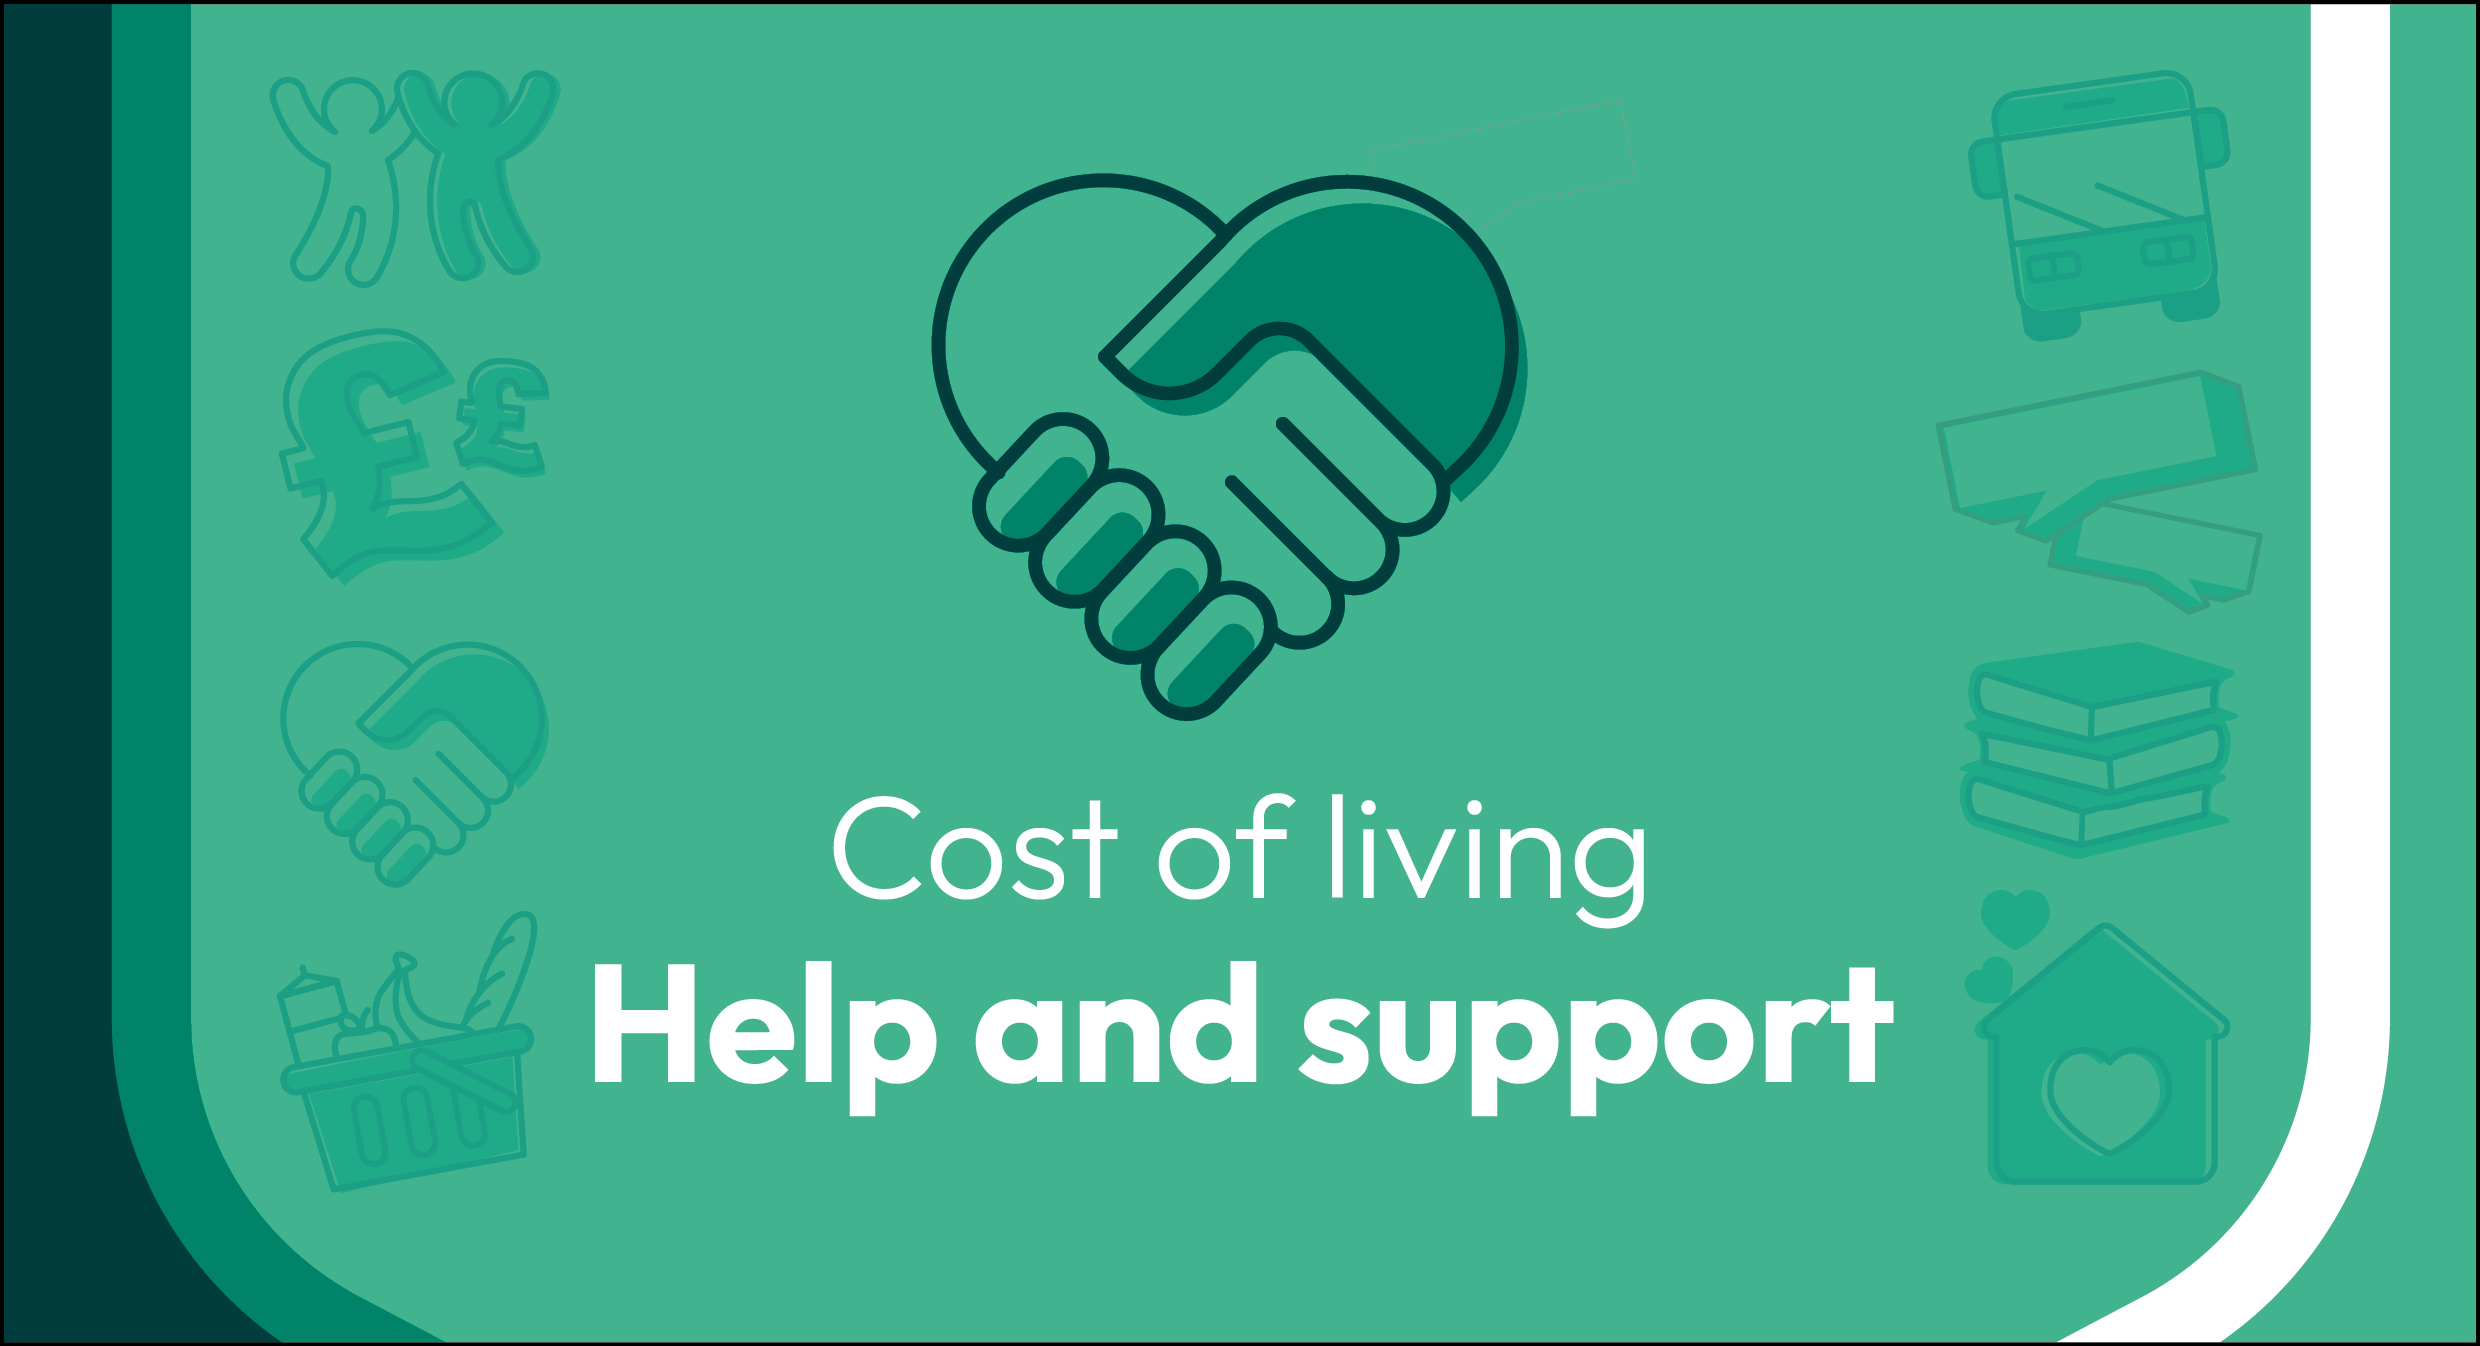 Cost of living help and support - illustration of holding two hands in the shape of a heart